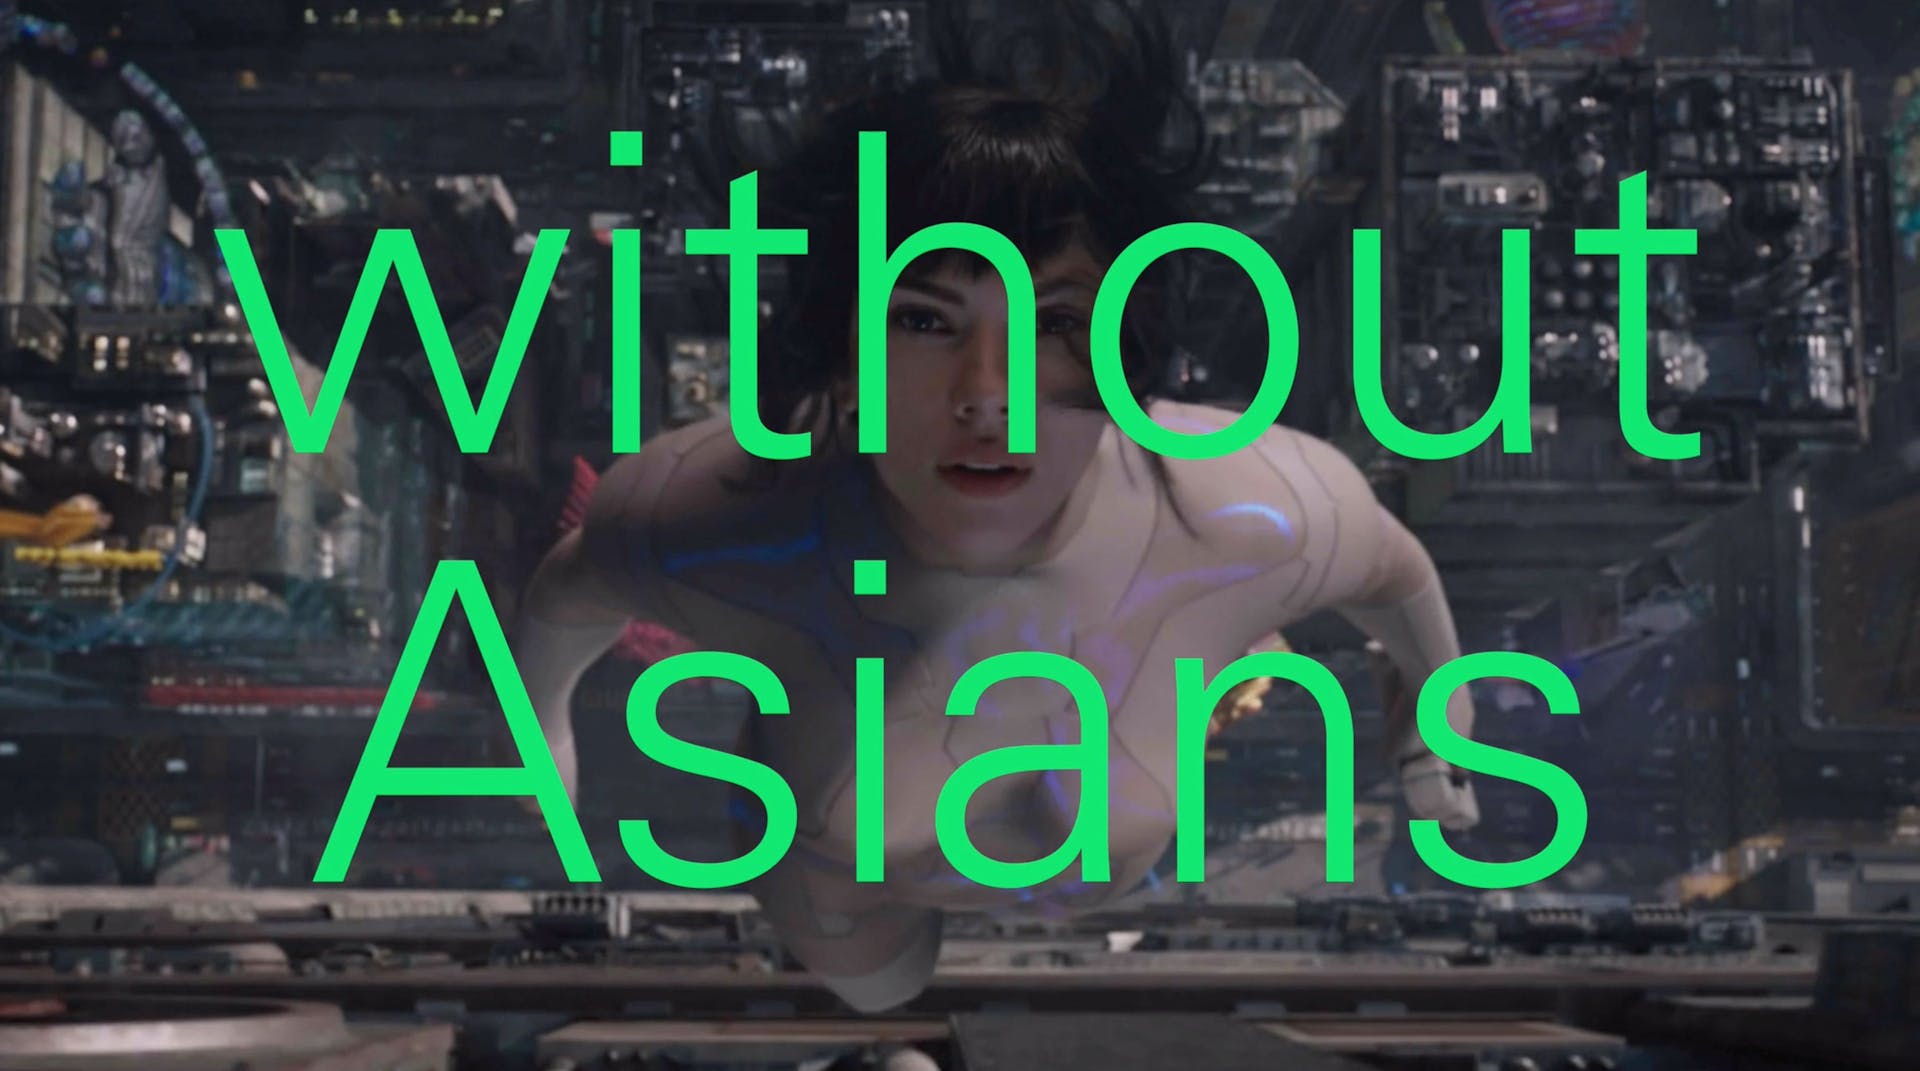 looking down at a woman falling from a tall building, with the text “without Asians” in green foregrounding the image.